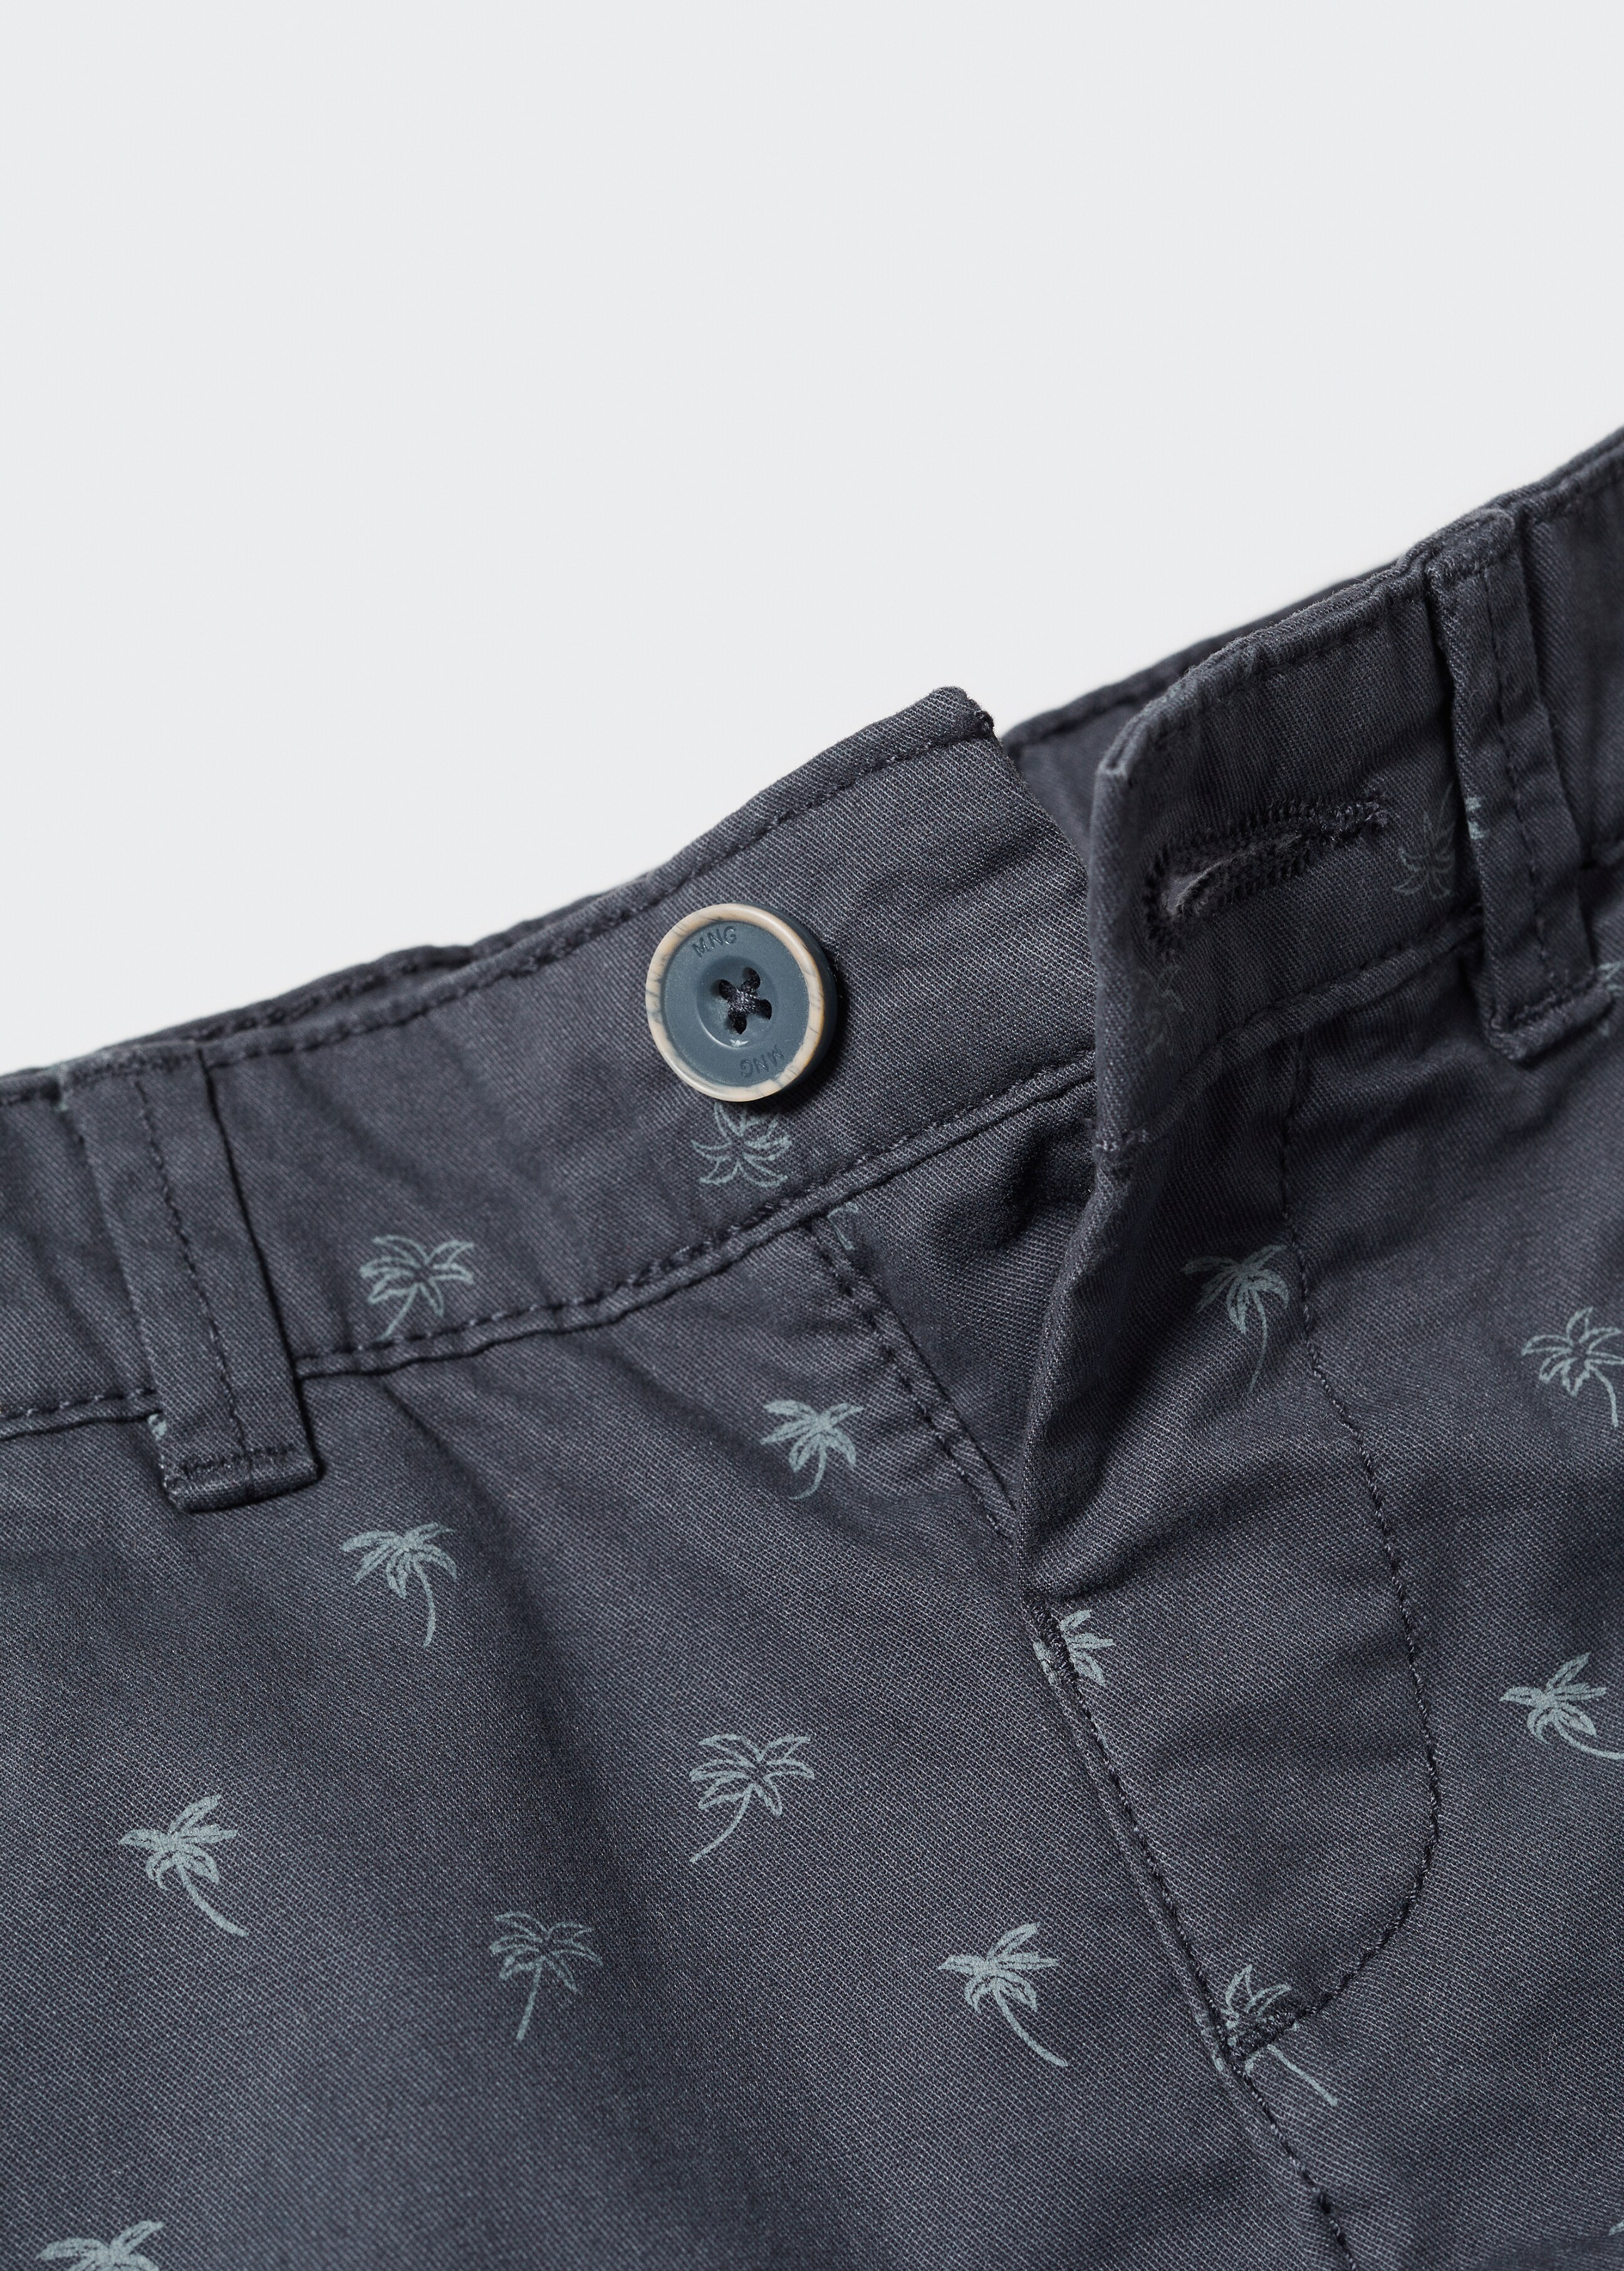 Printed Bermuda shorts - Details of the article 0